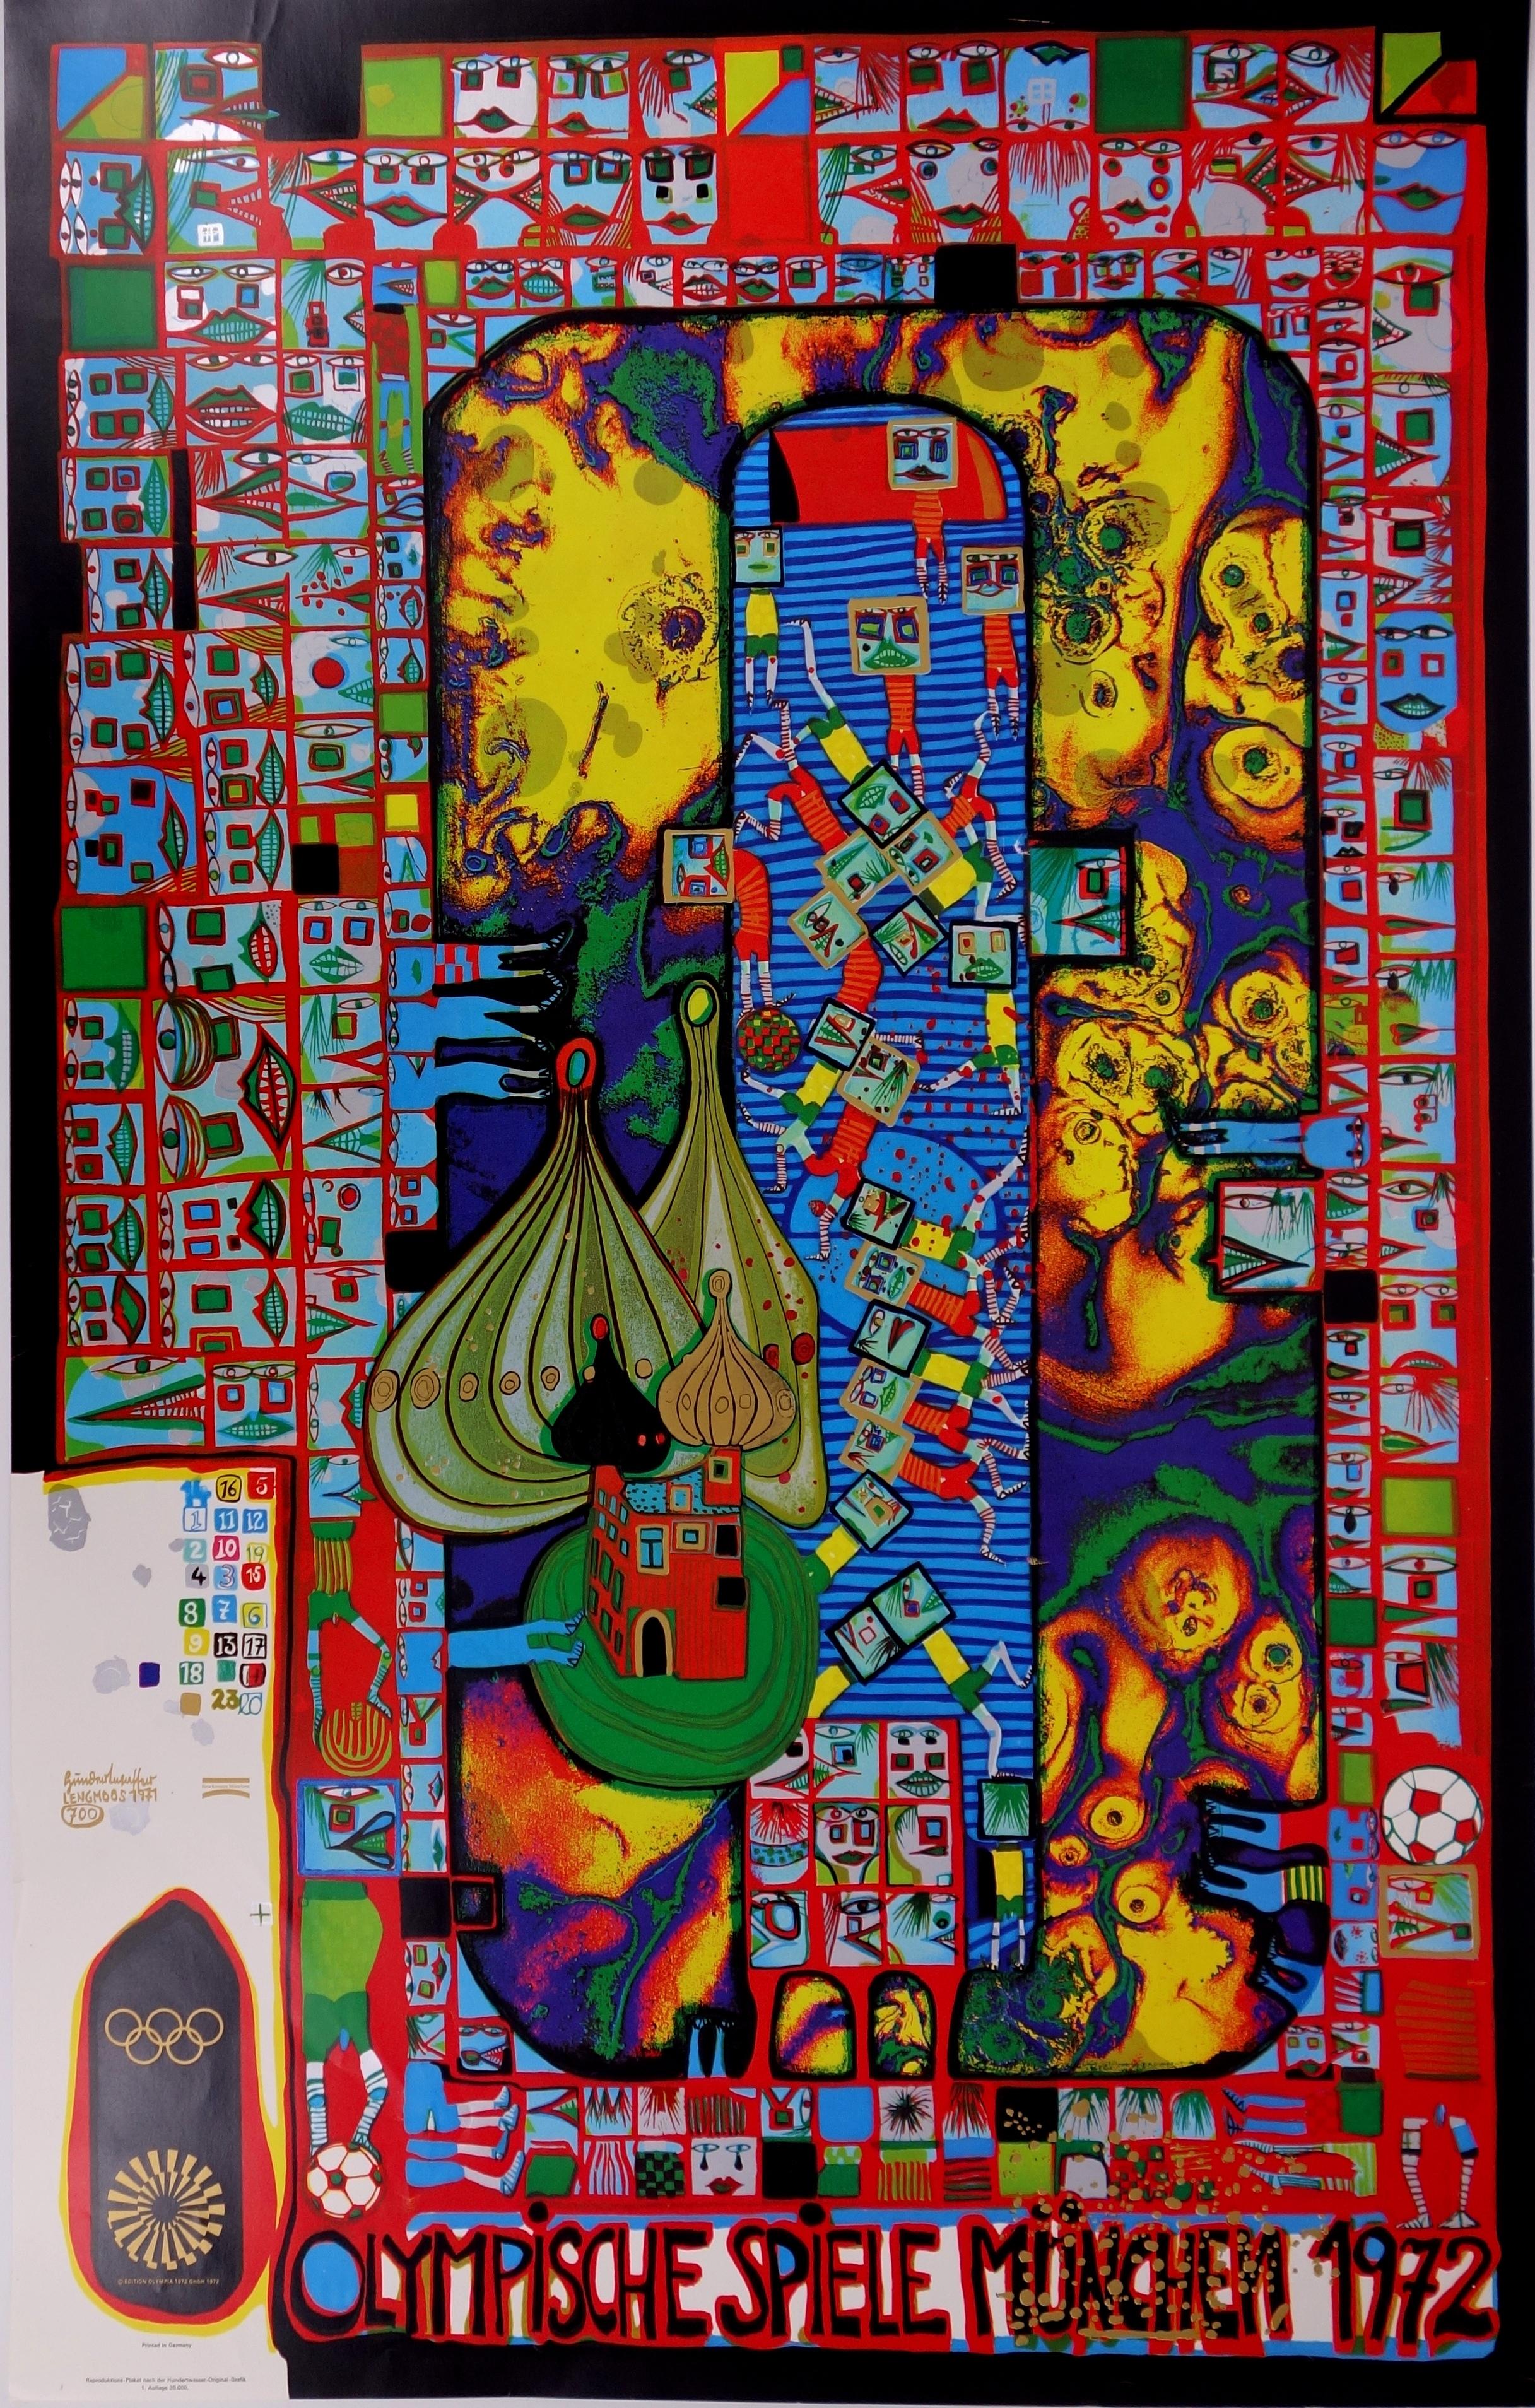 Friedensreich Hundertwasser Abstract Print - Olympiade - Lithograph (Olympic Games Munich 1972)